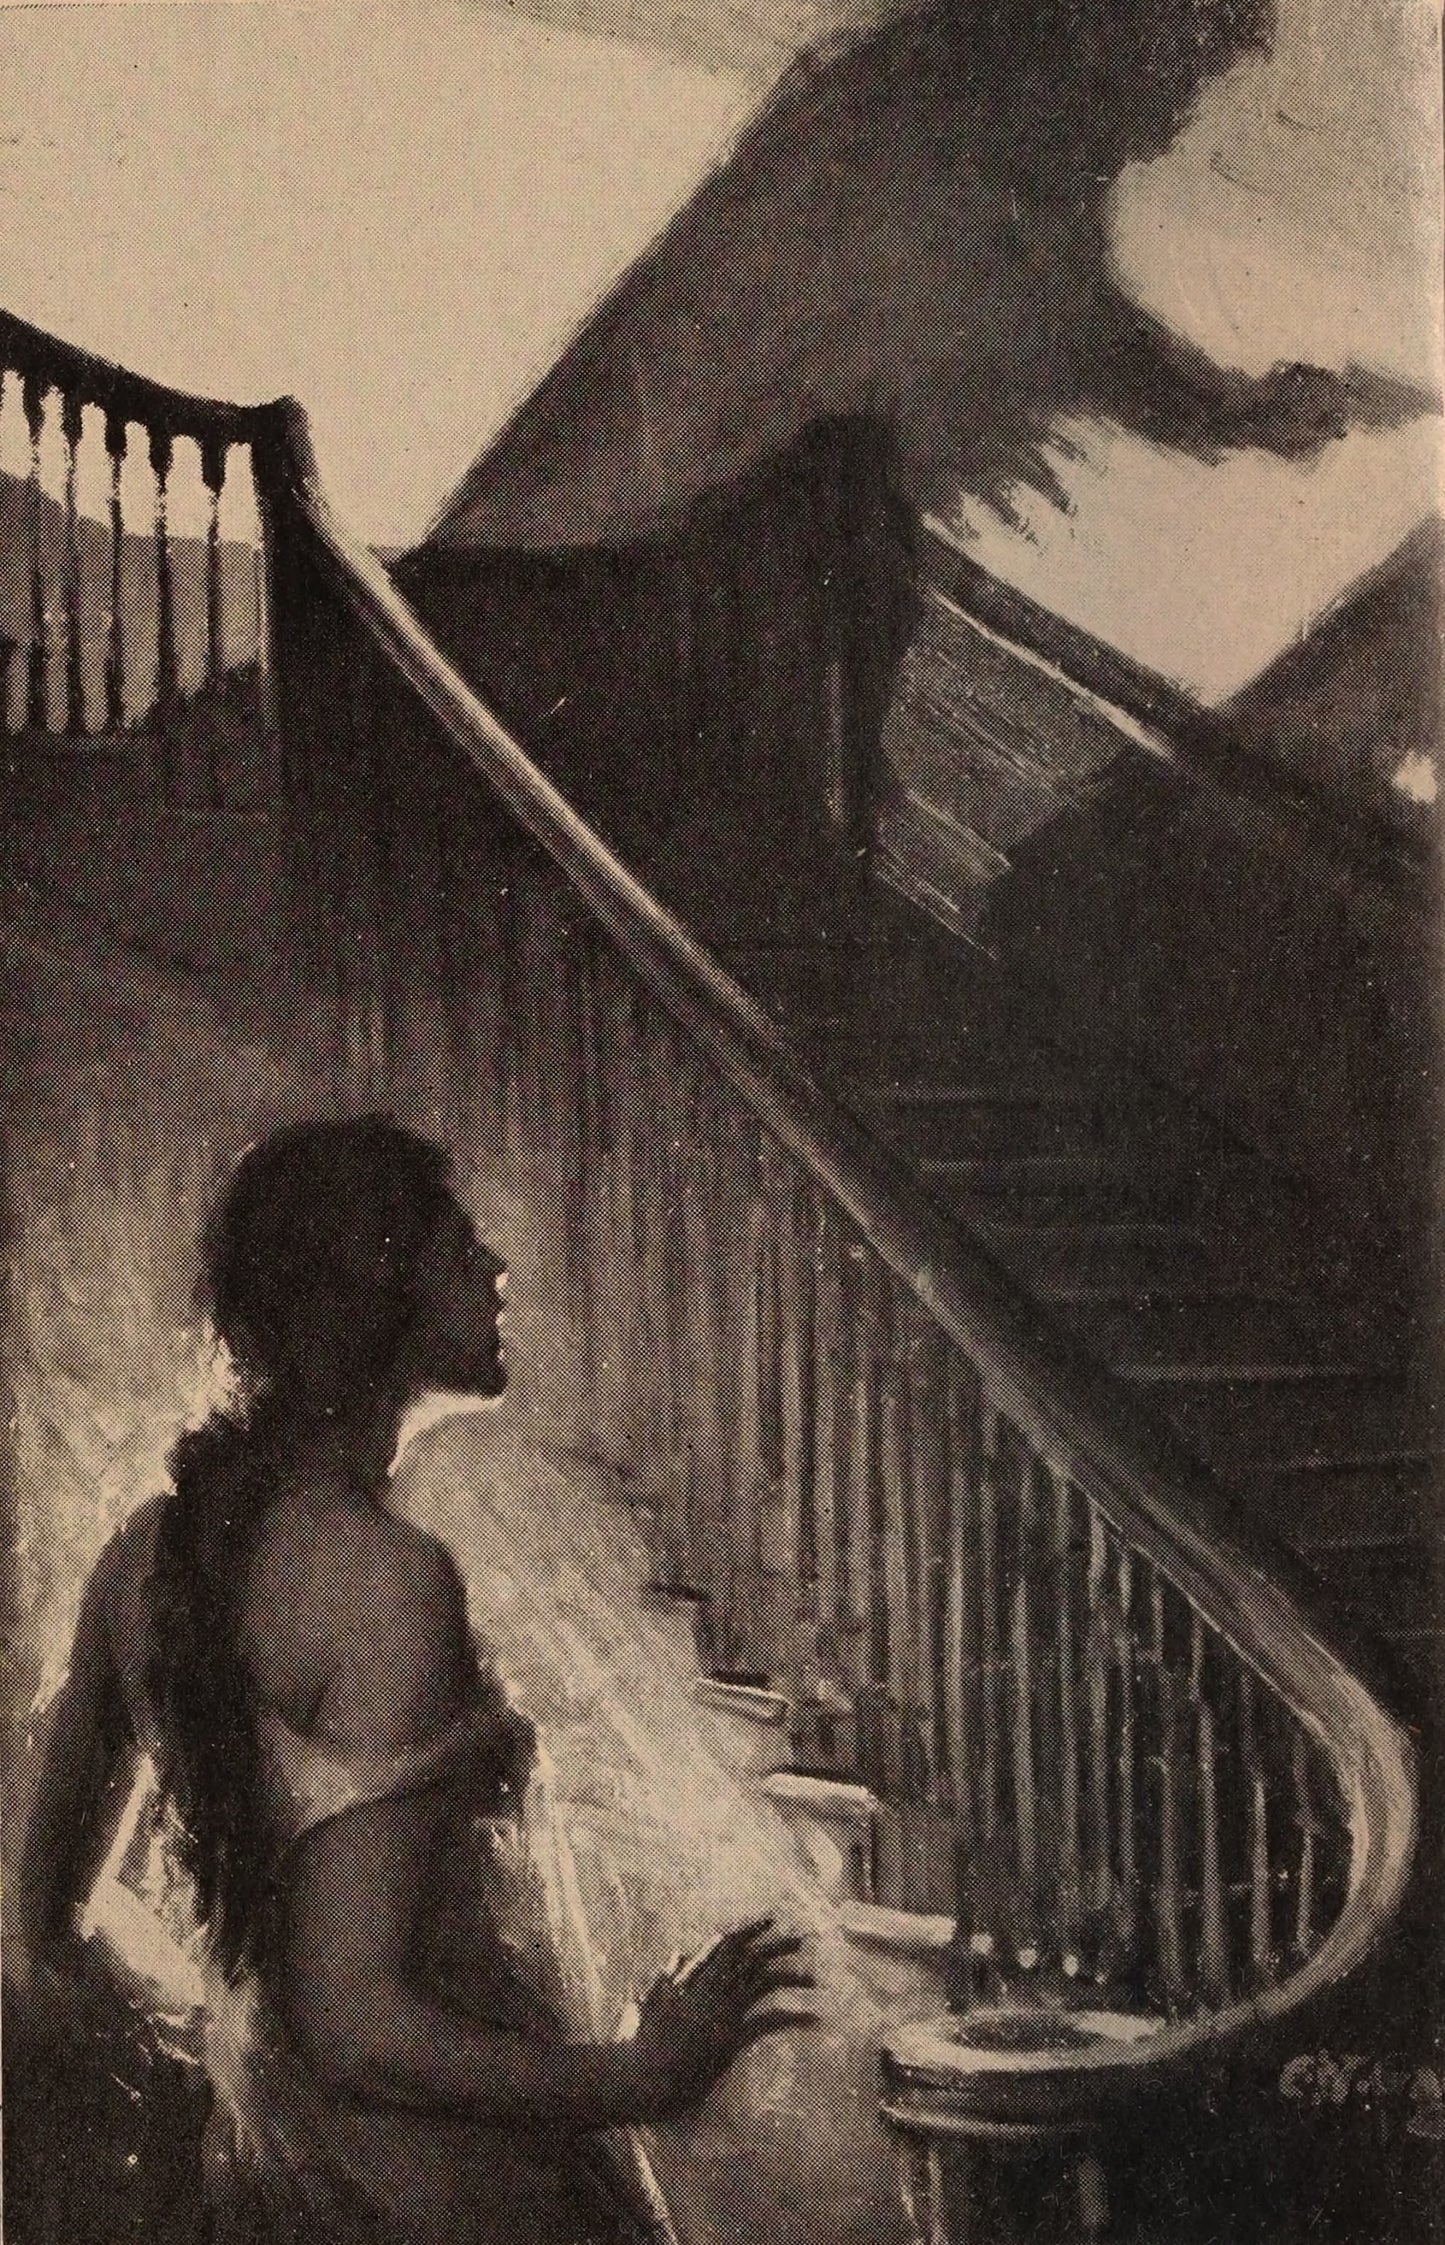 “The Feeling That She Was Not Alone Took Possession of Her”, The Whisper on the Stair, 1924 - Postcard